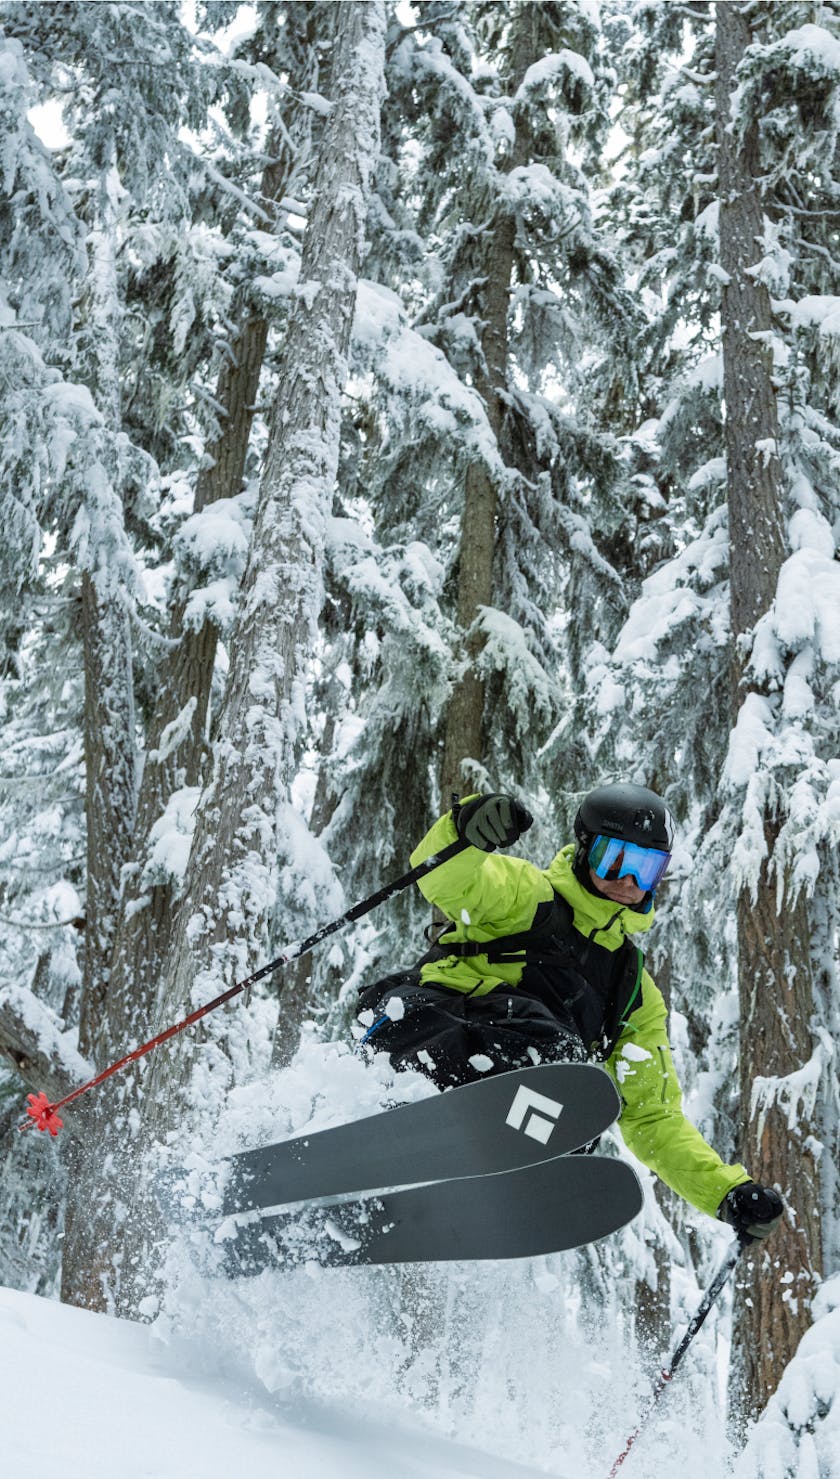 Black Diamond athlete Tobin Seagel skiing in the B.C. backcountry on the Helio Carbon 115 Carbon Skis. 